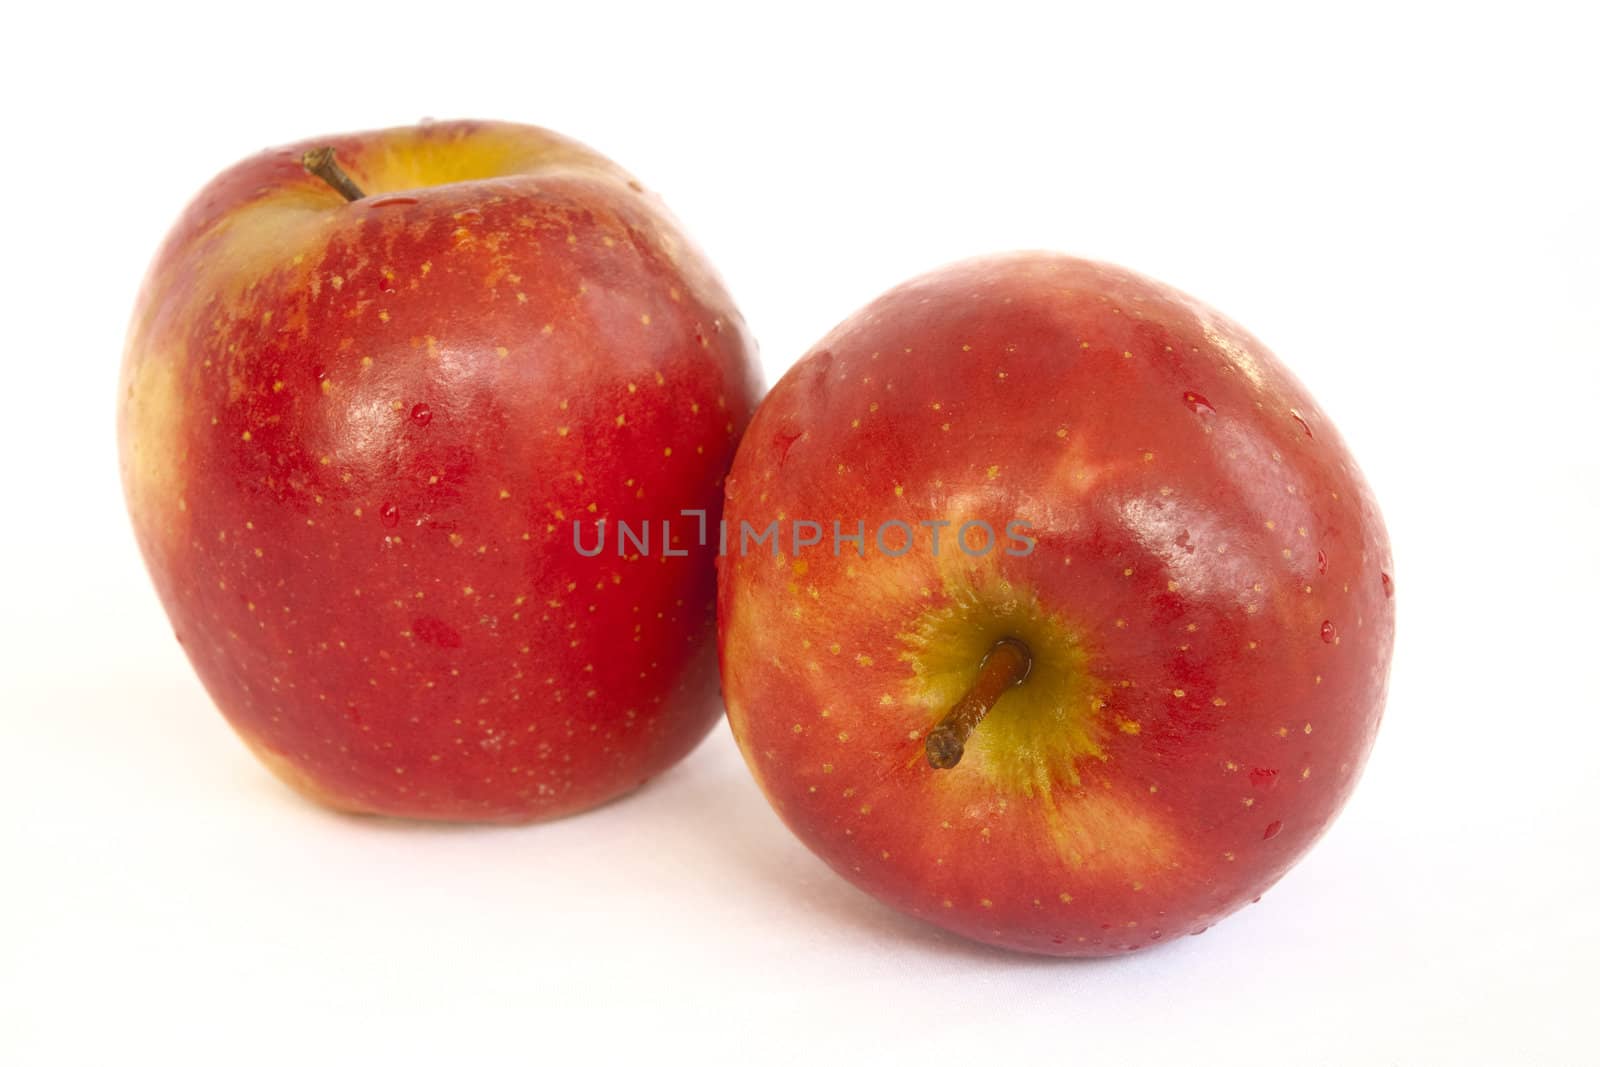 Two apples on white background
